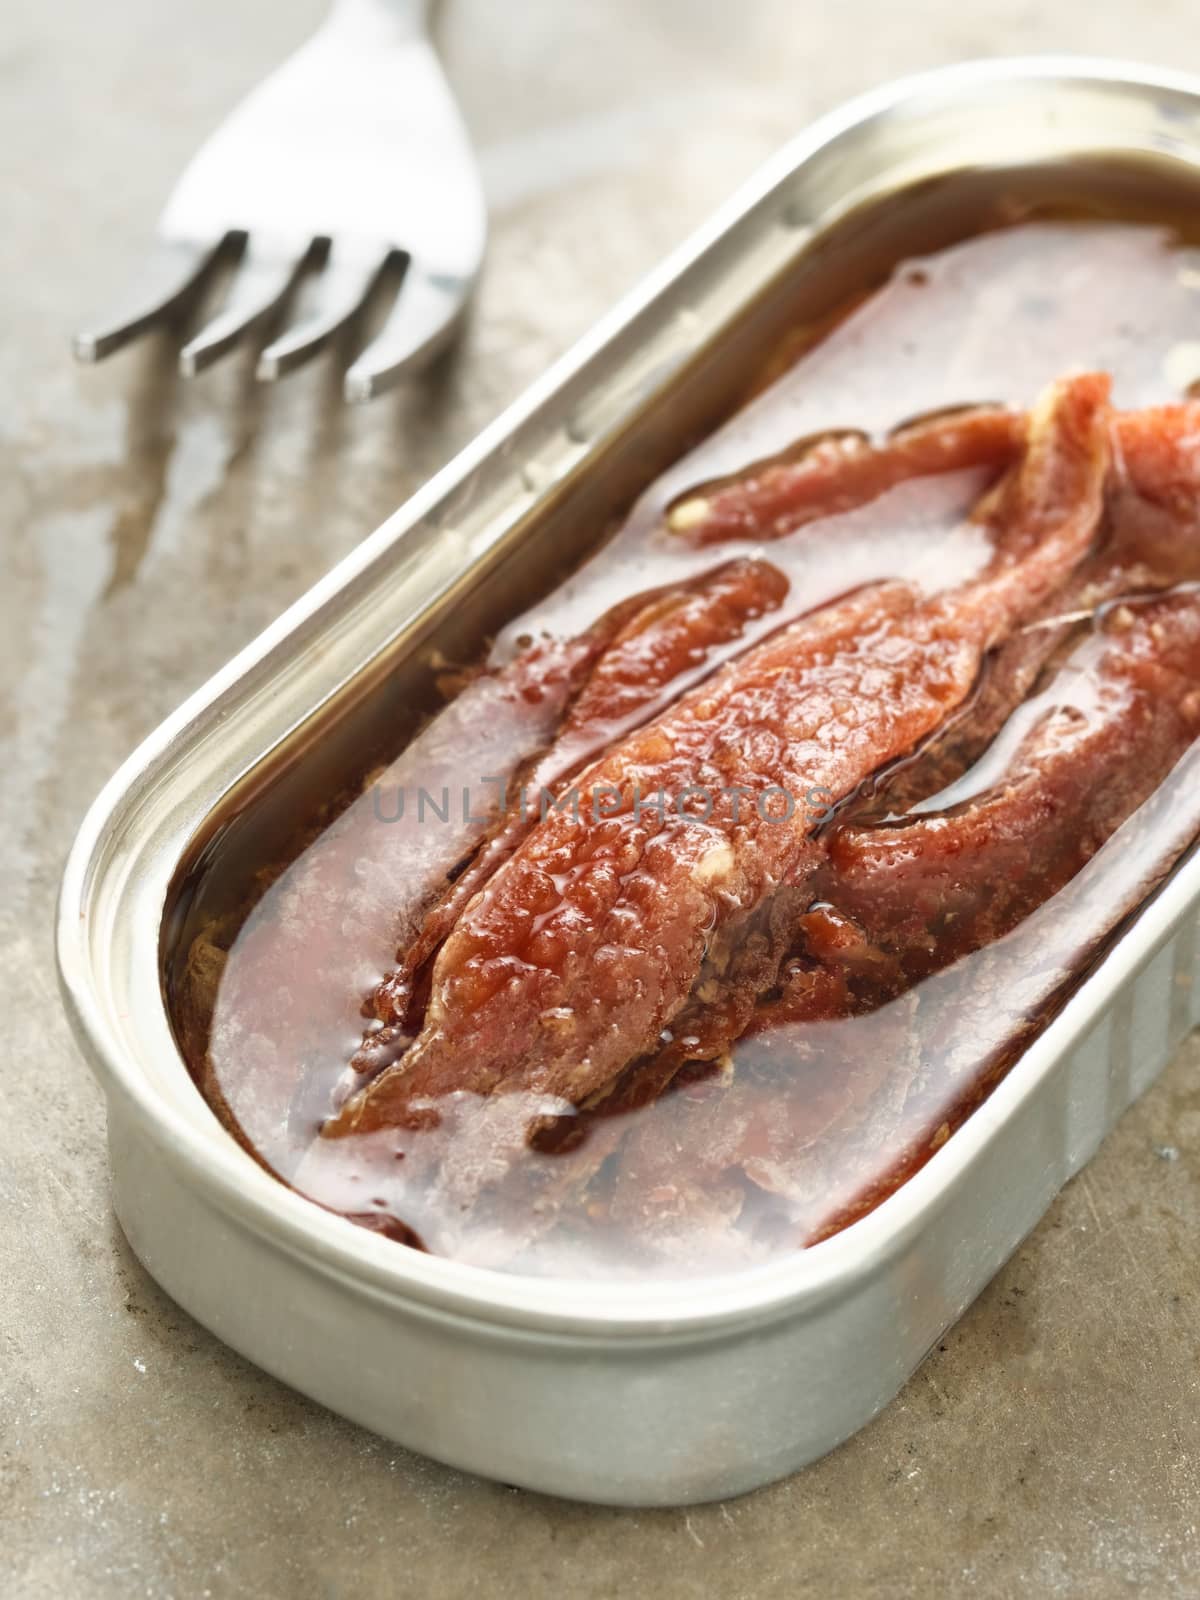 canned salted anchovy fillets in oil by zkruger